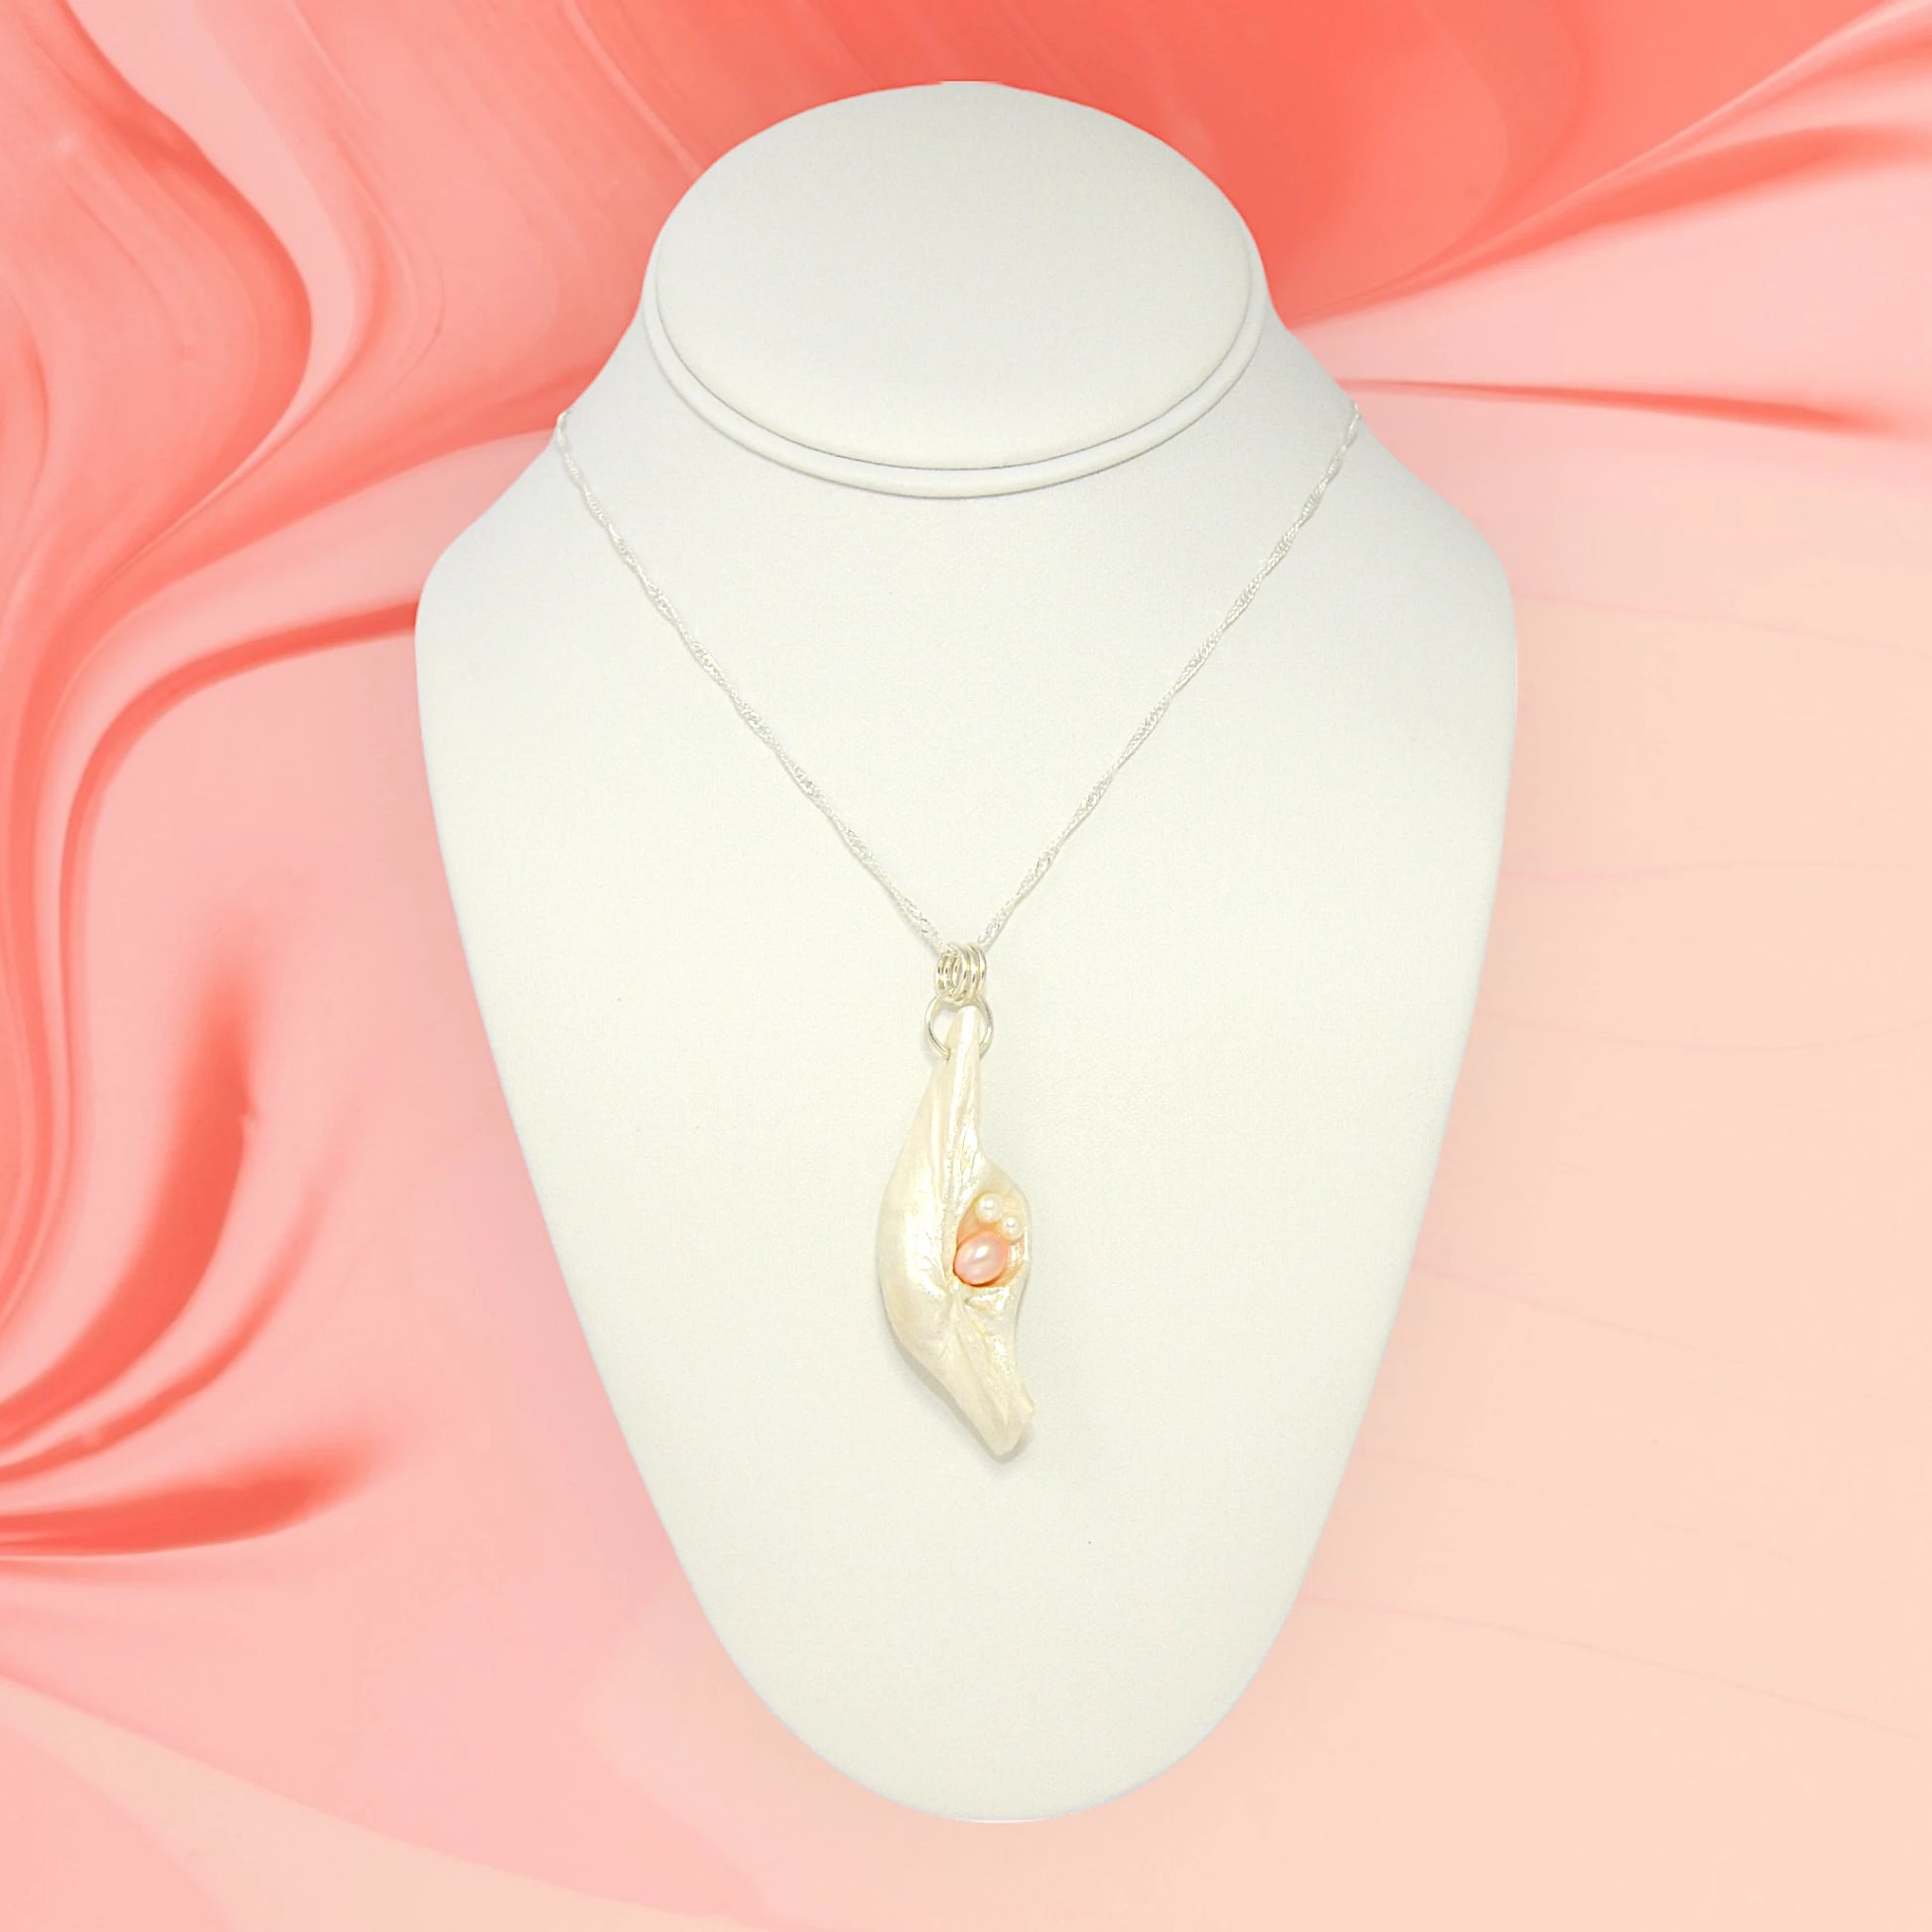 This natural seashell pendant has a real 7-8mm pink freshwater pearl and two baby pearls.